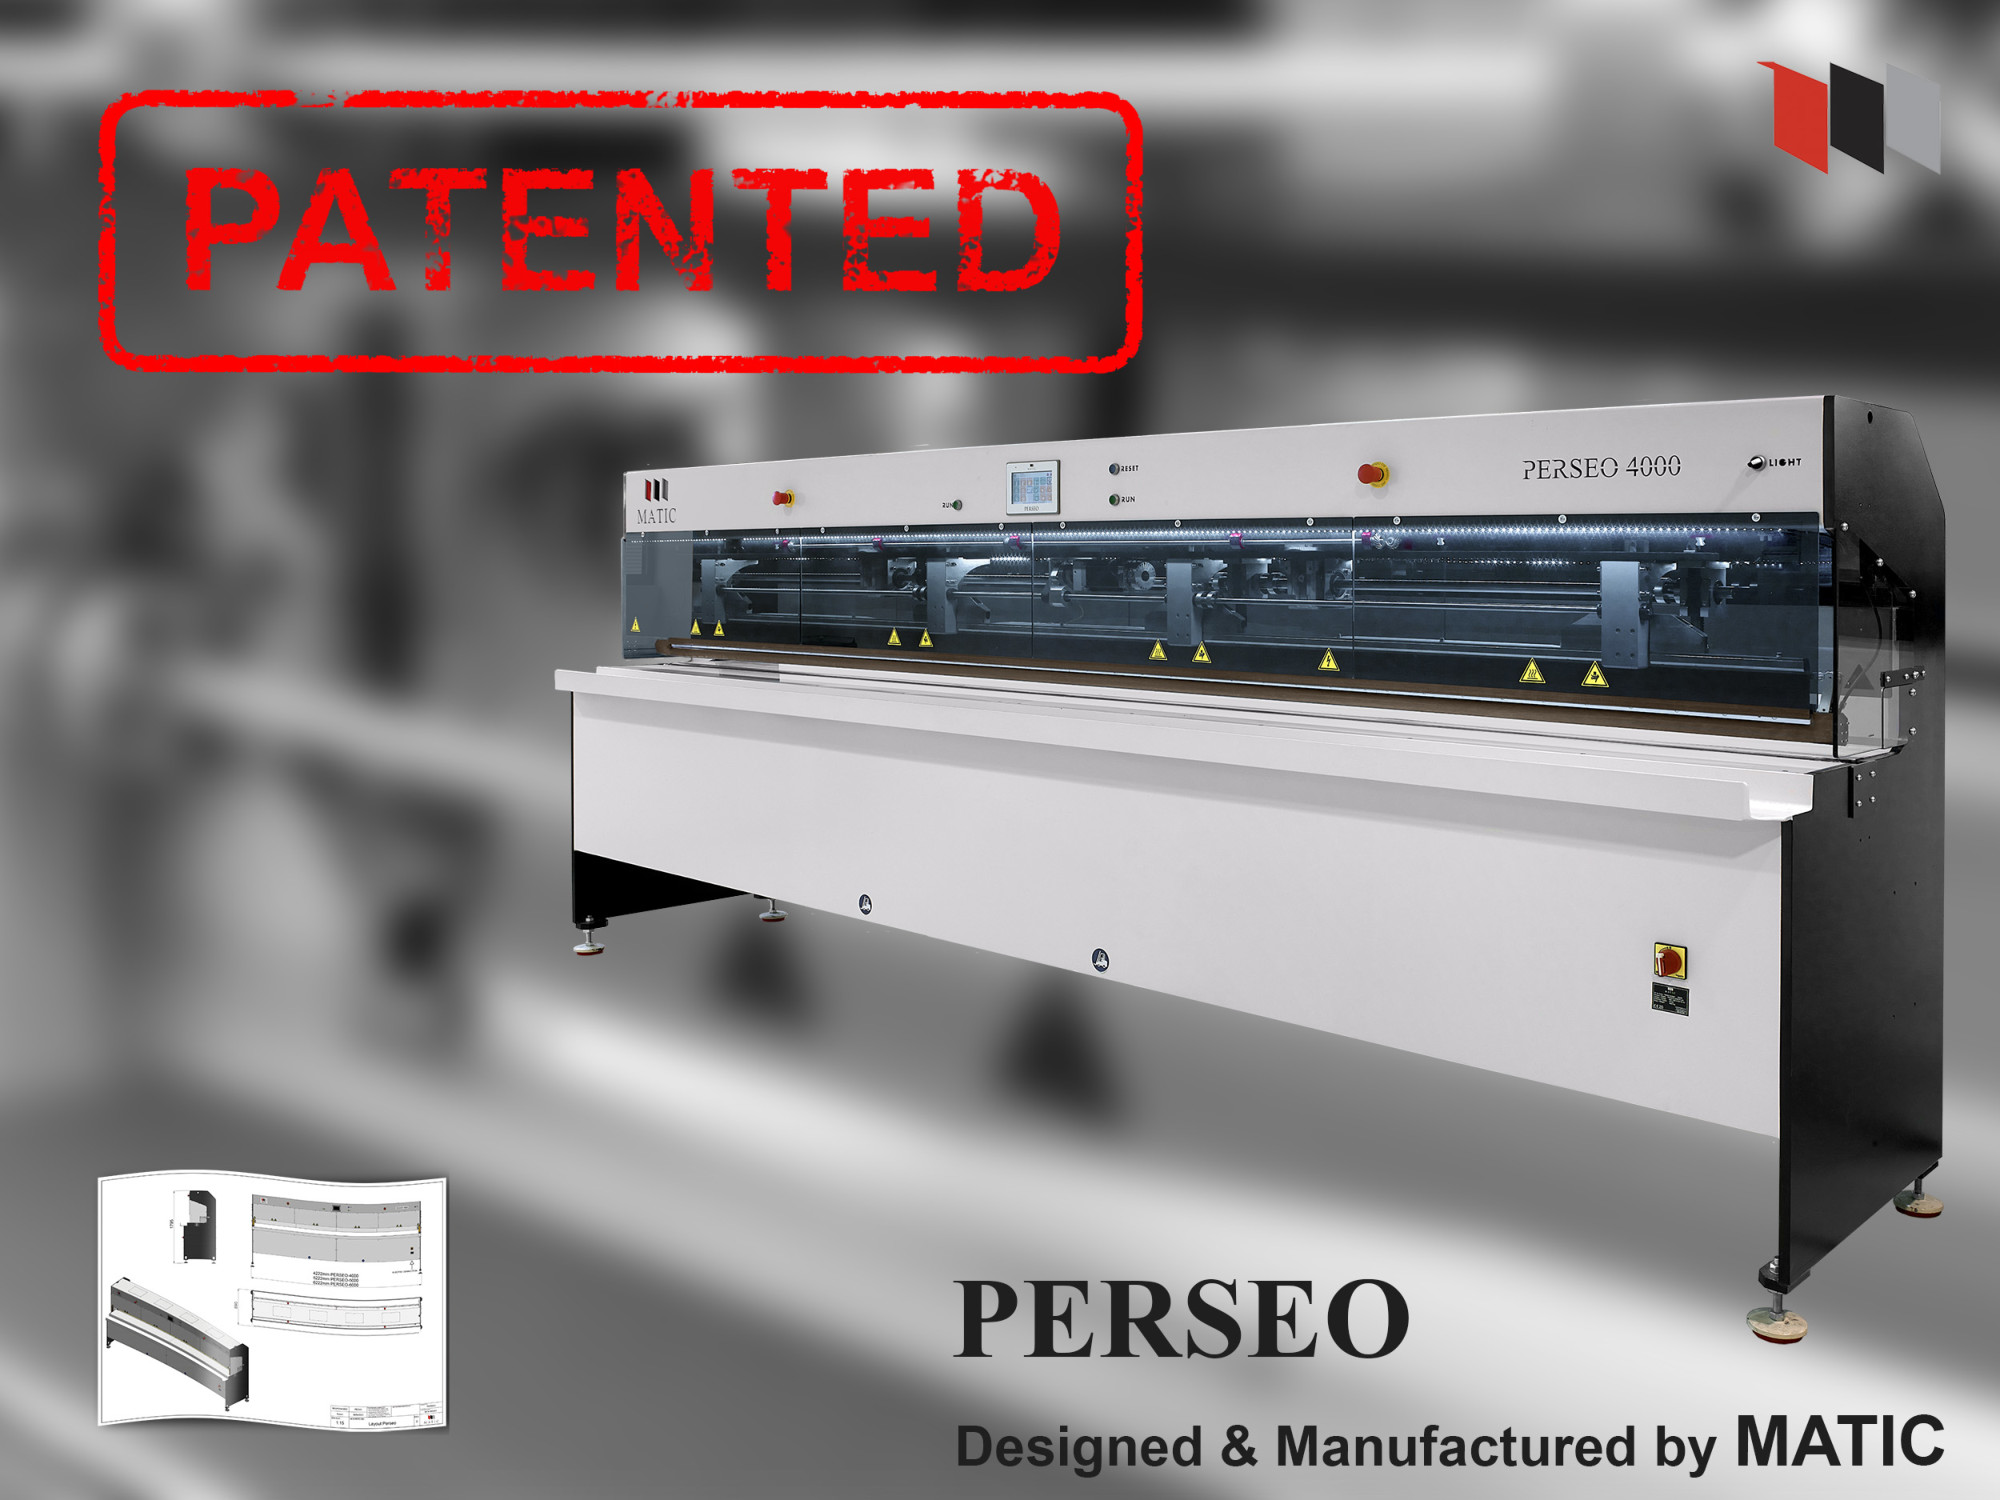 Our new welding machine, PERSEO, is patented!